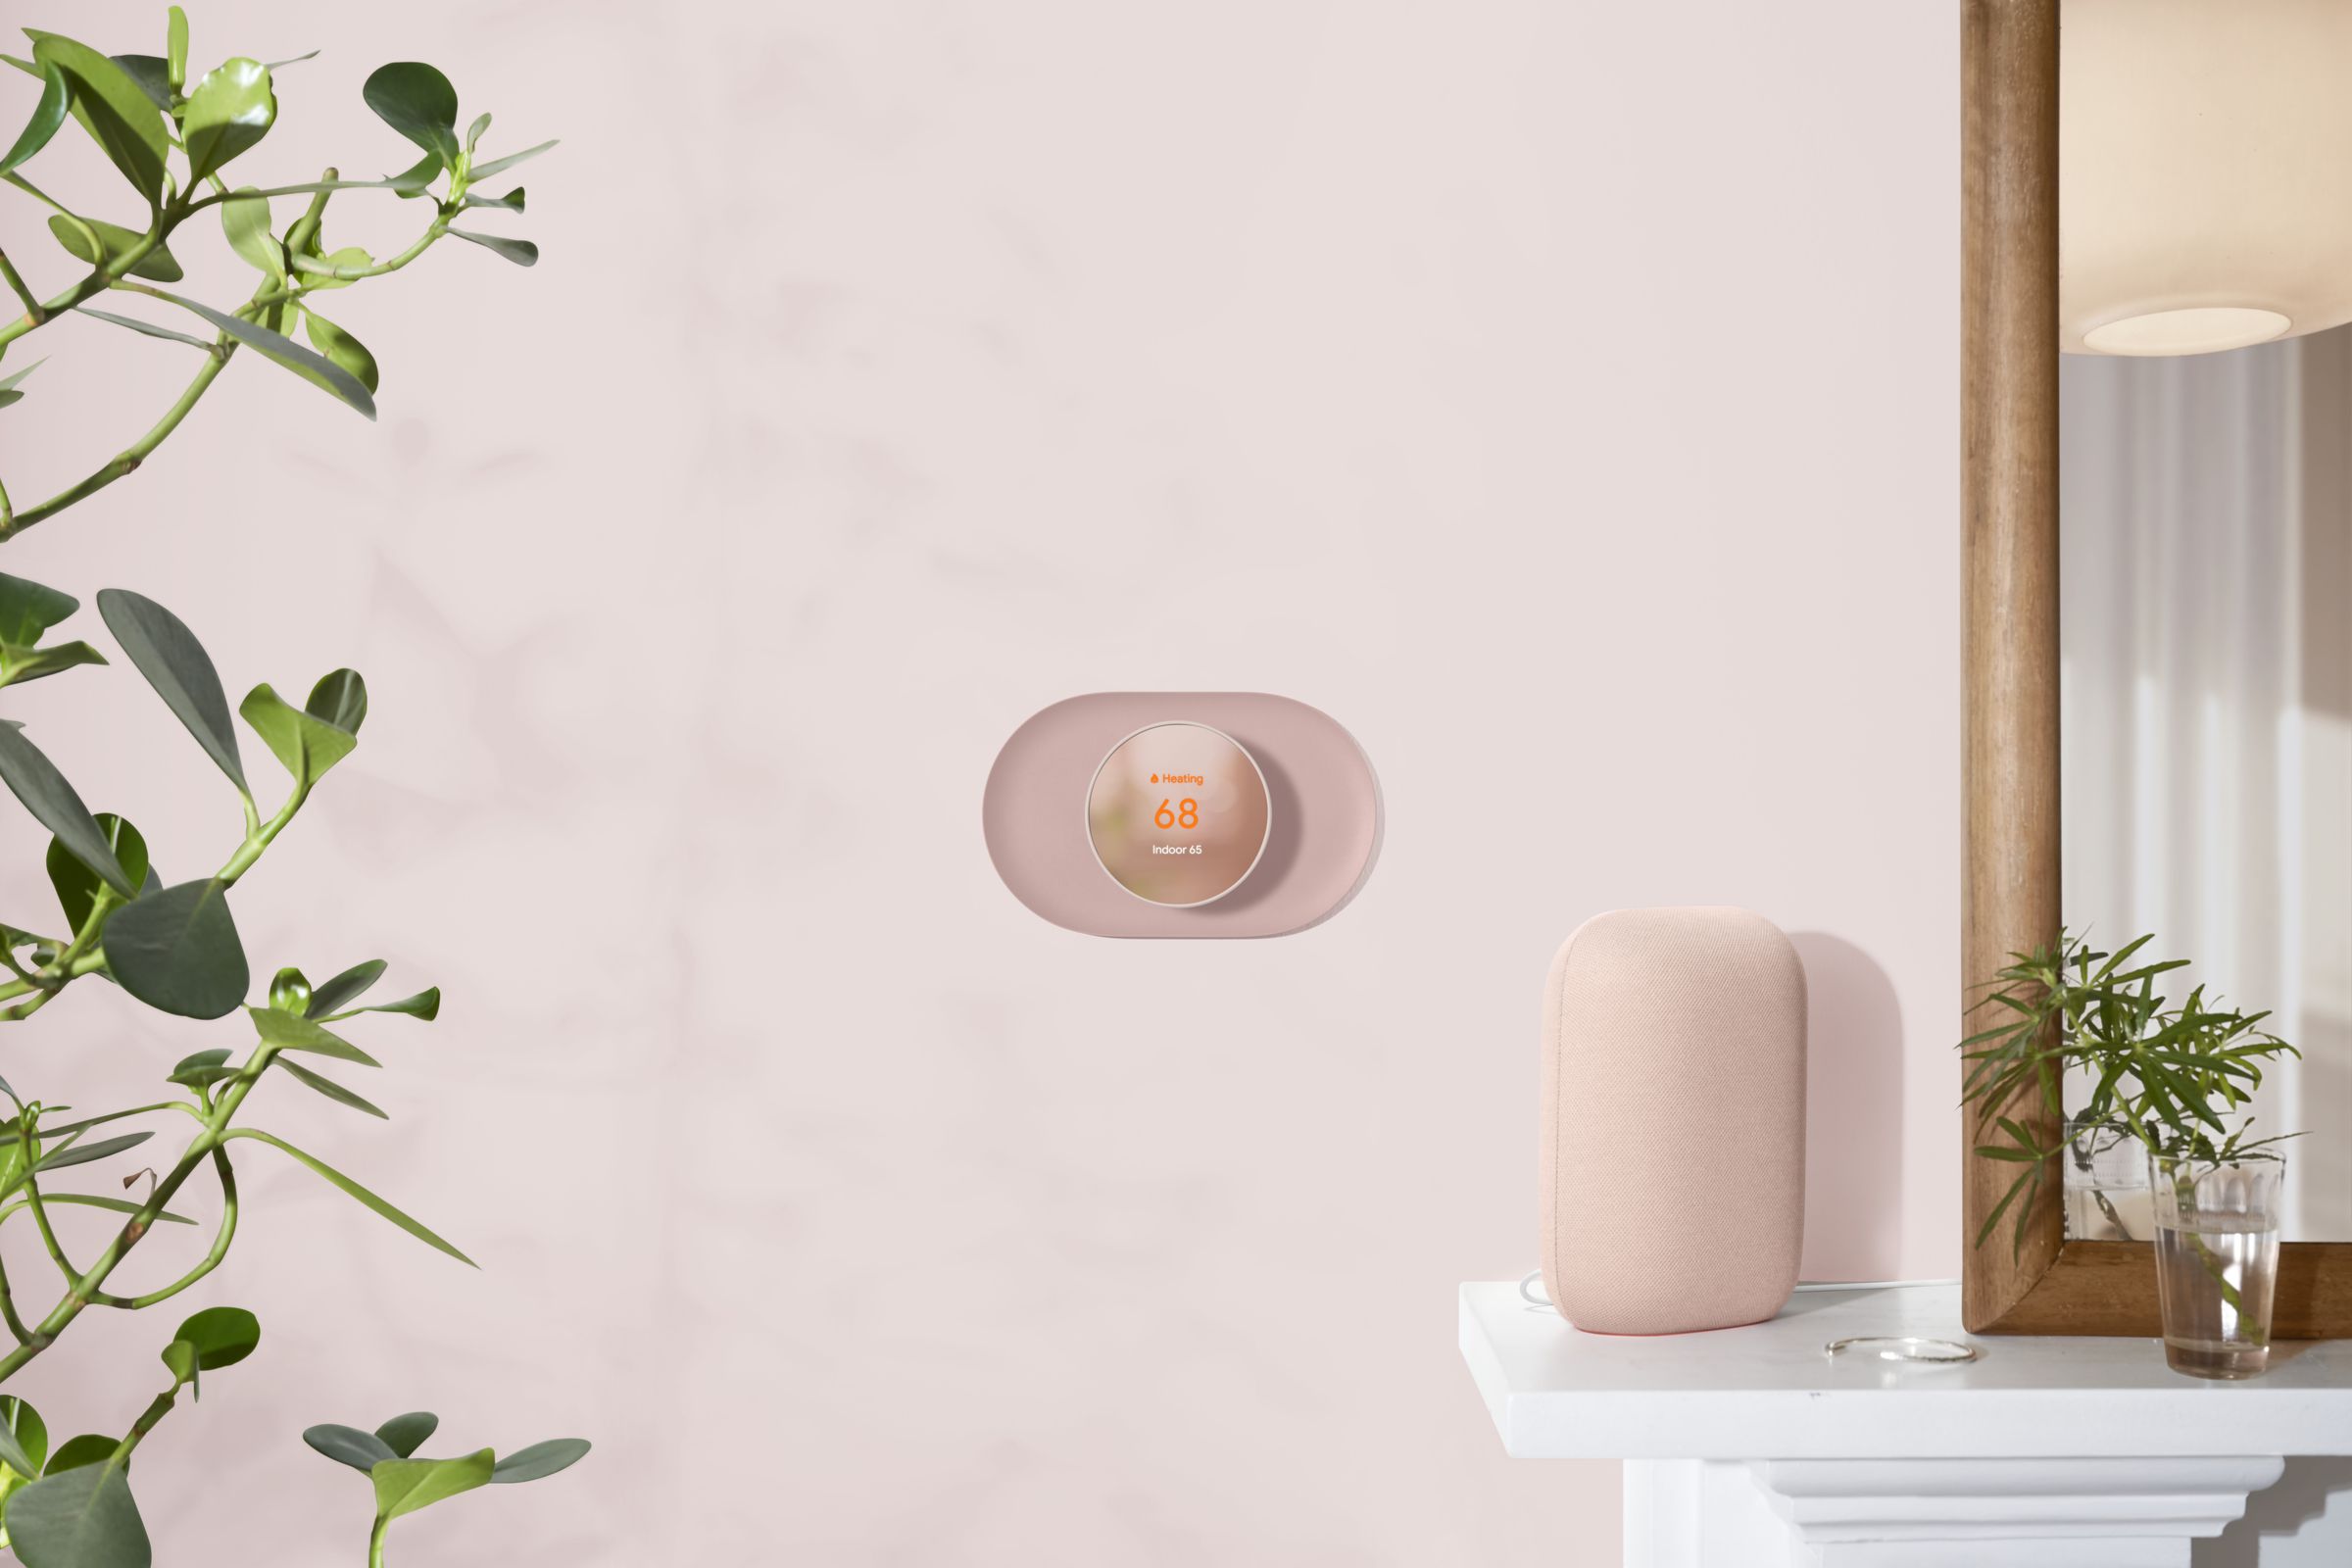 A light pink Nest Thermostat mounted on the wall with a matching color Nest Audio speaker on a shelf next to it.